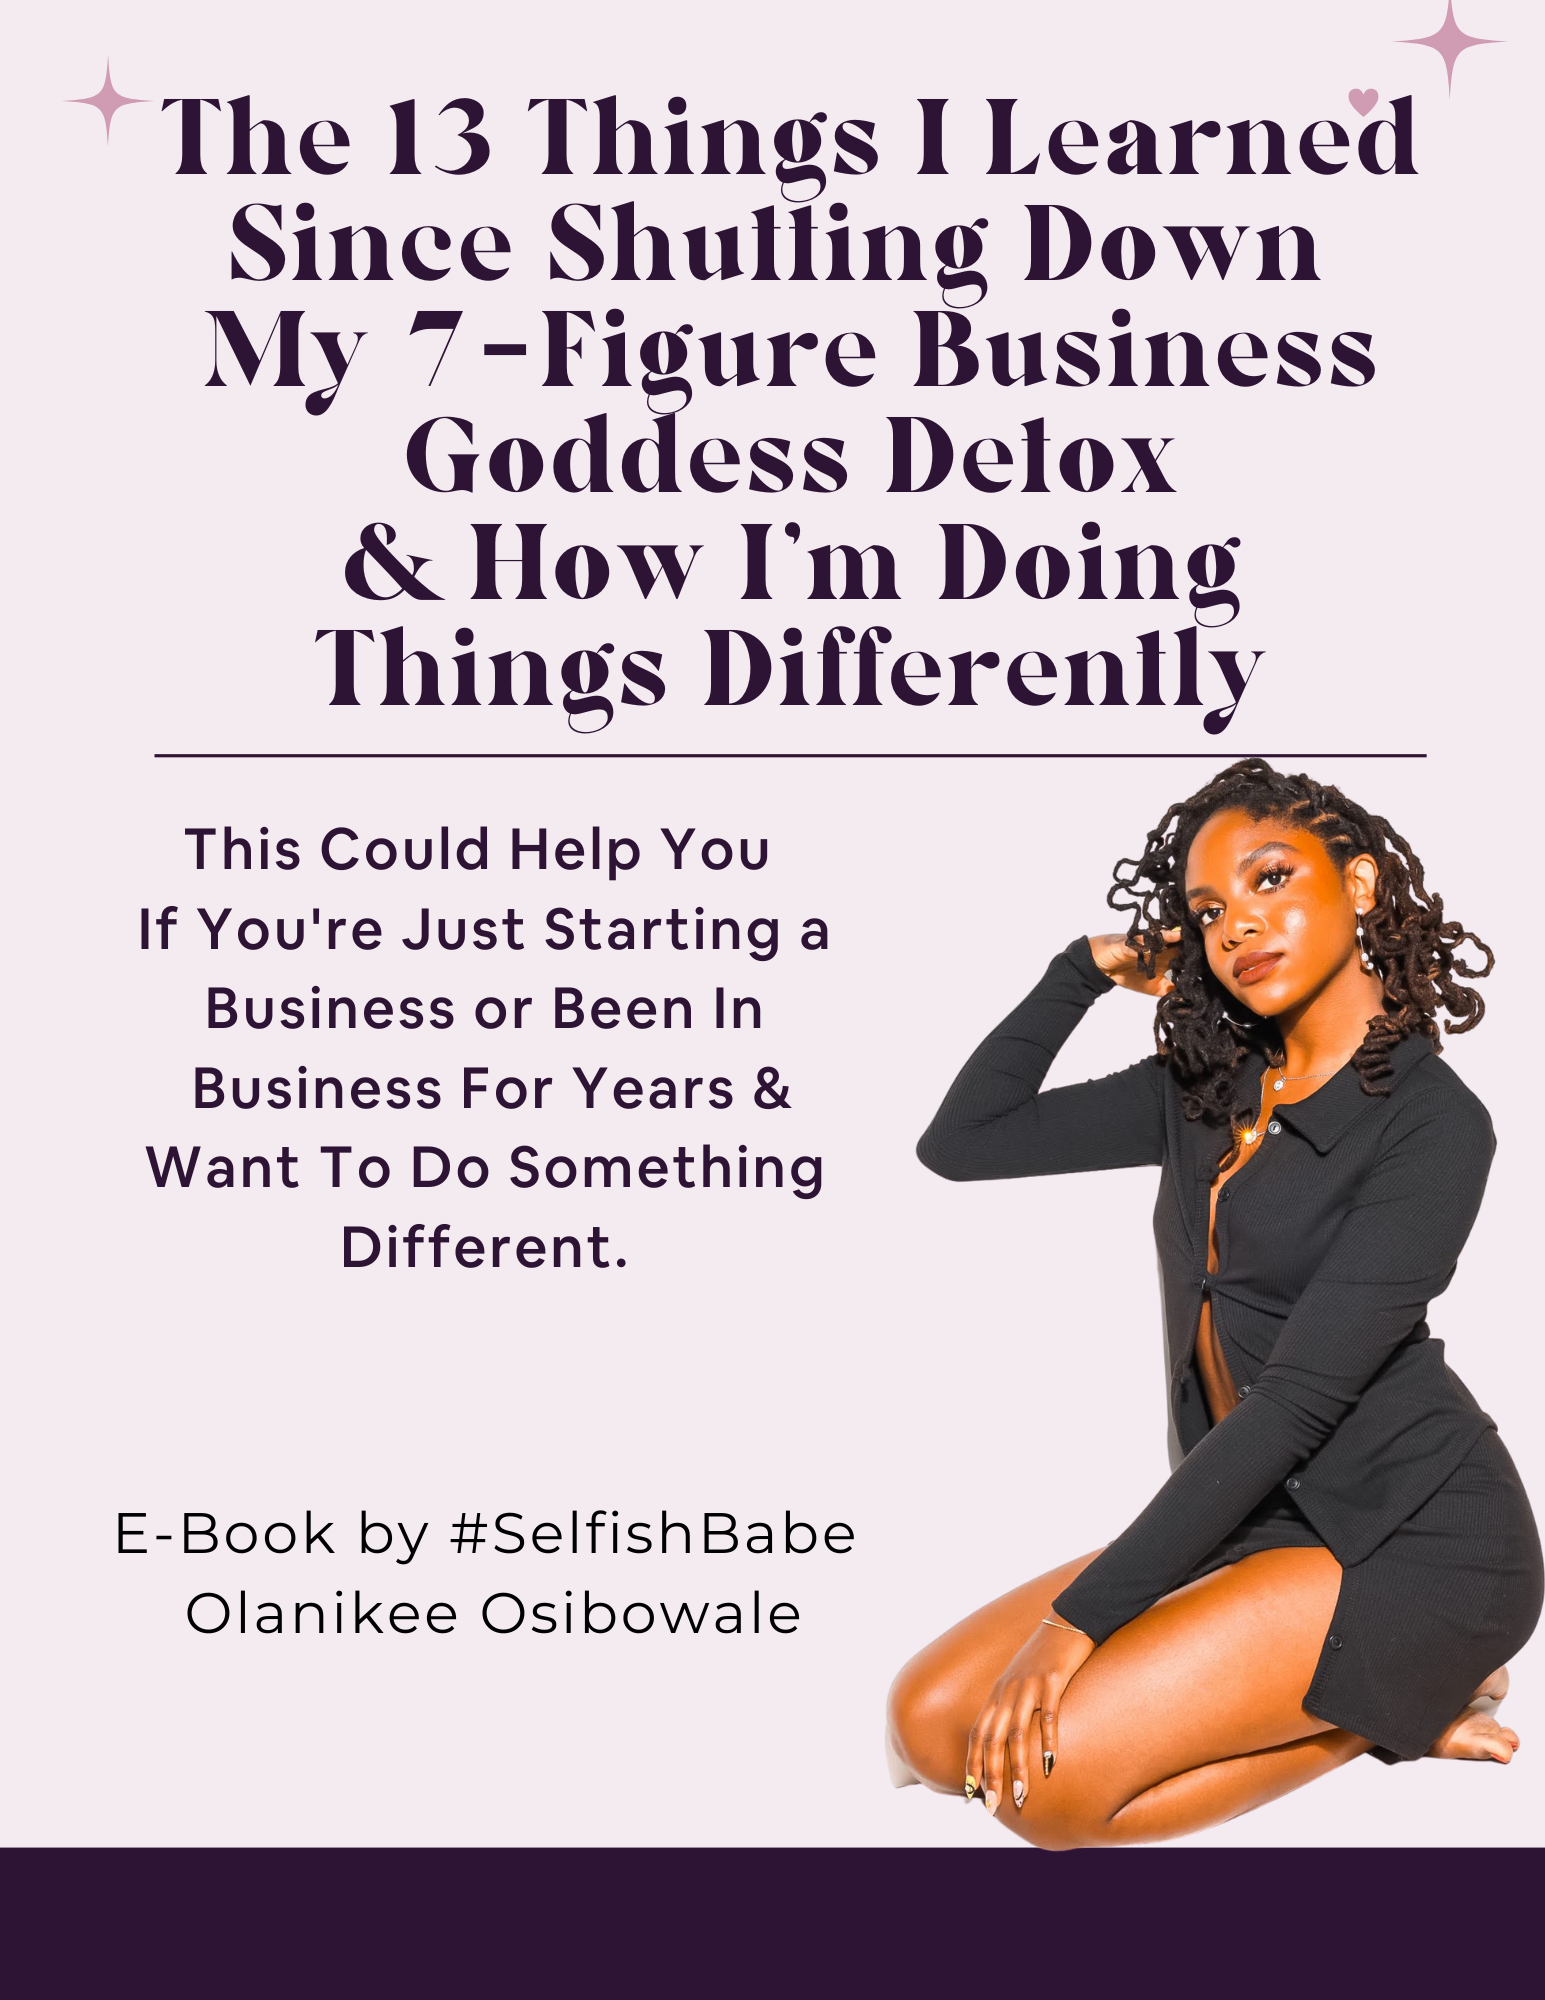 The 13 Things I Learned Since Shutting Down  My 7-Figure Business Goddess Detox & How I'm Doing Things Differently